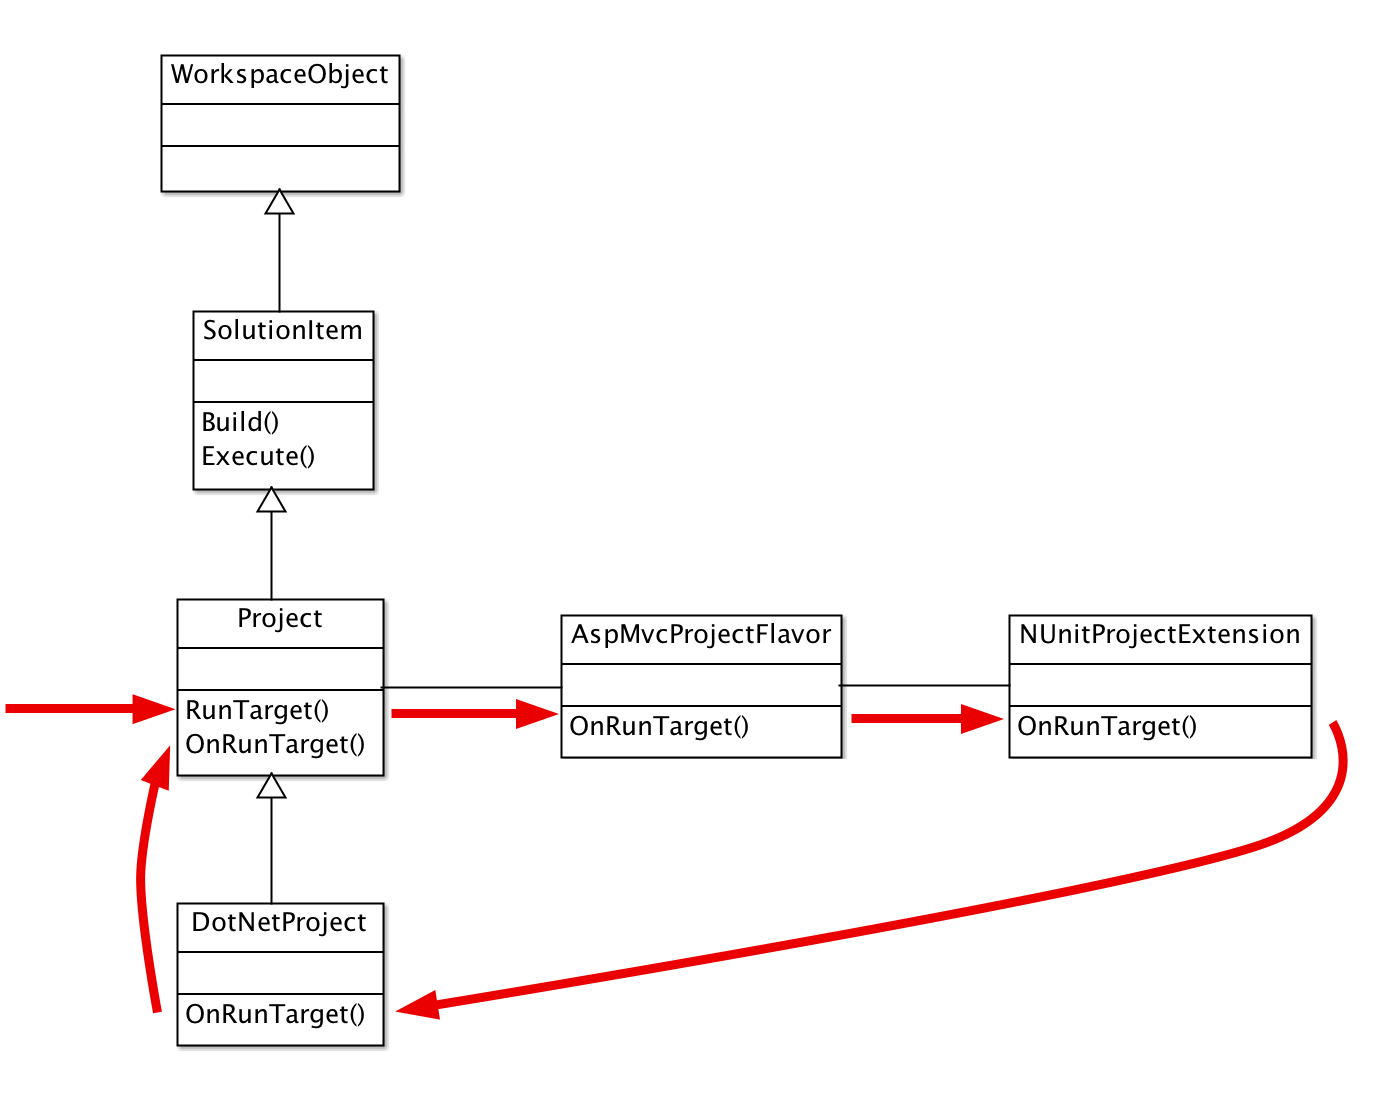 Method call flow through extension chain